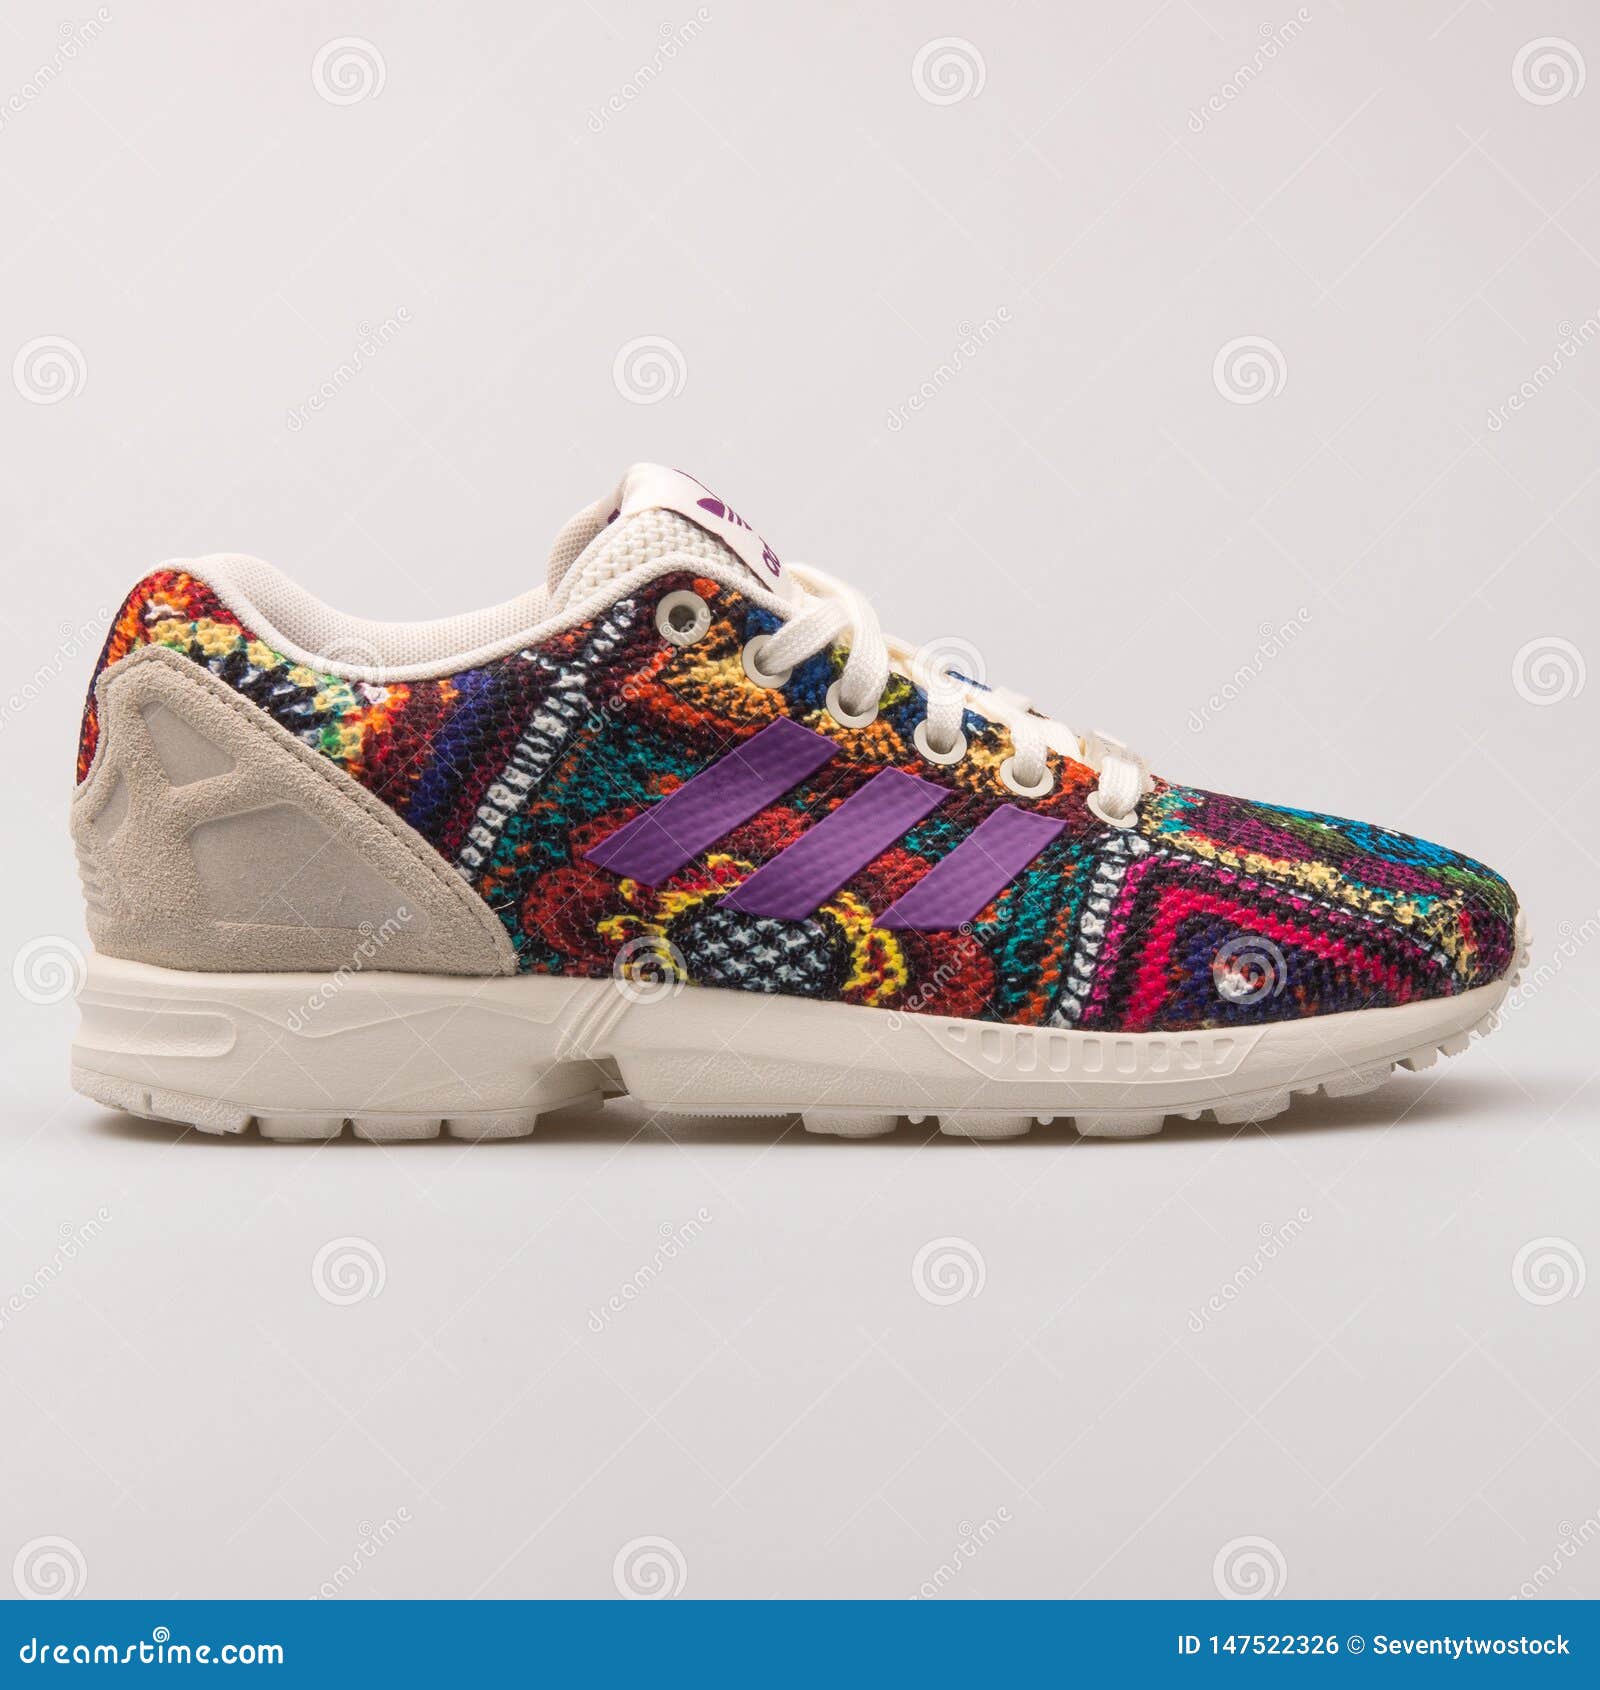 Adidas ZX Multi Color Sneaker Editorial - Image of fitness, 147522326